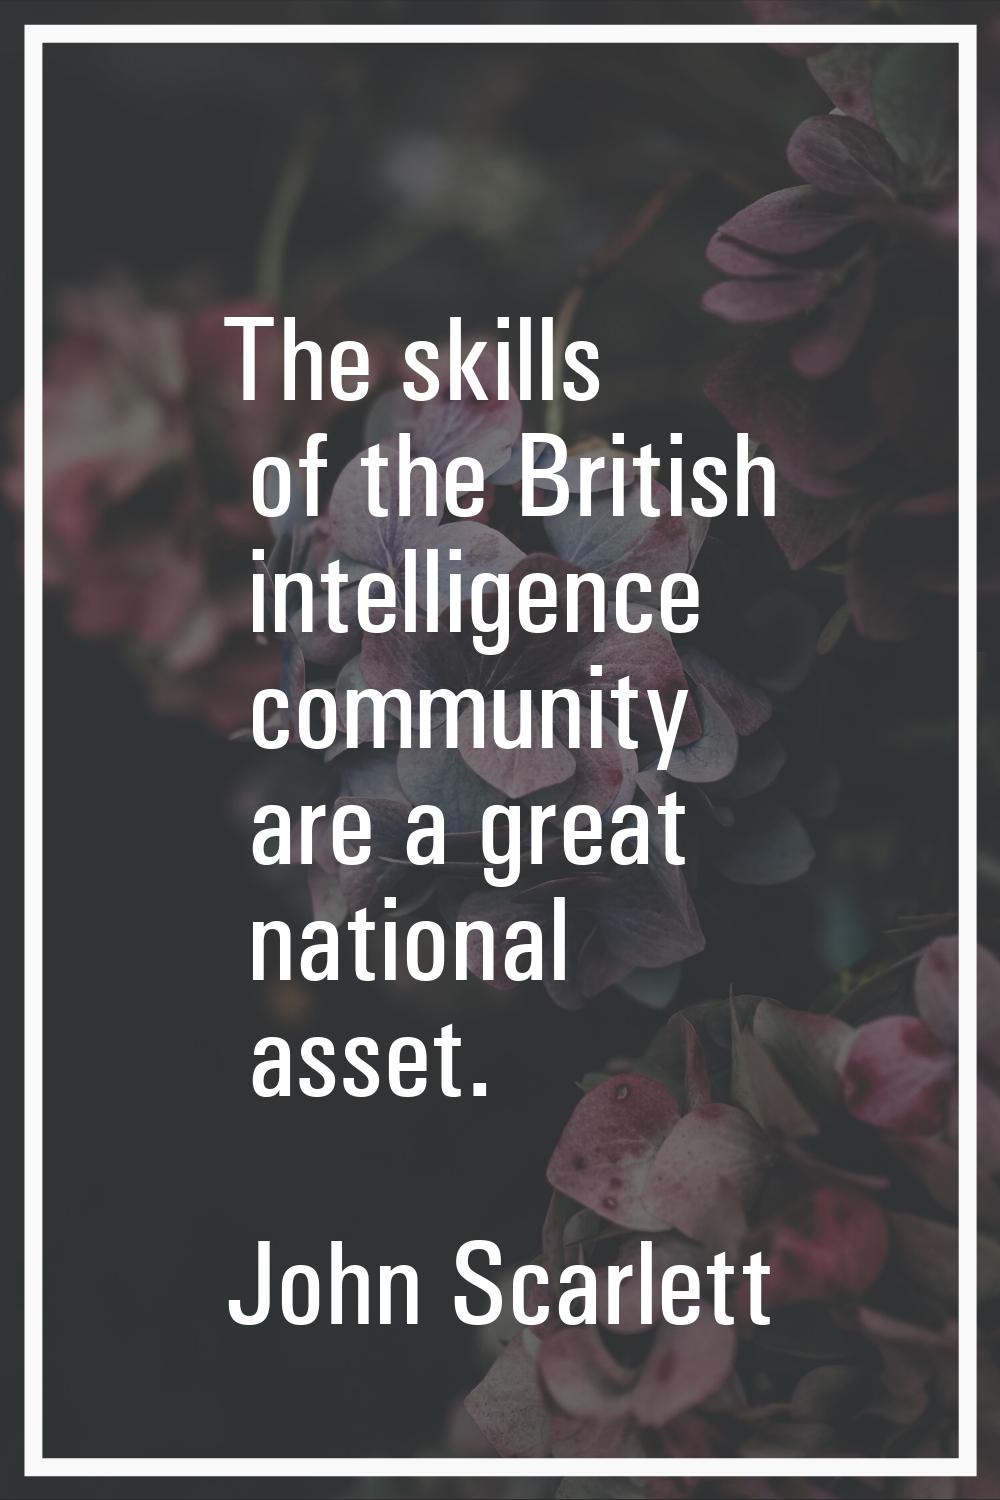 The skills of the British intelligence community are a great national asset.